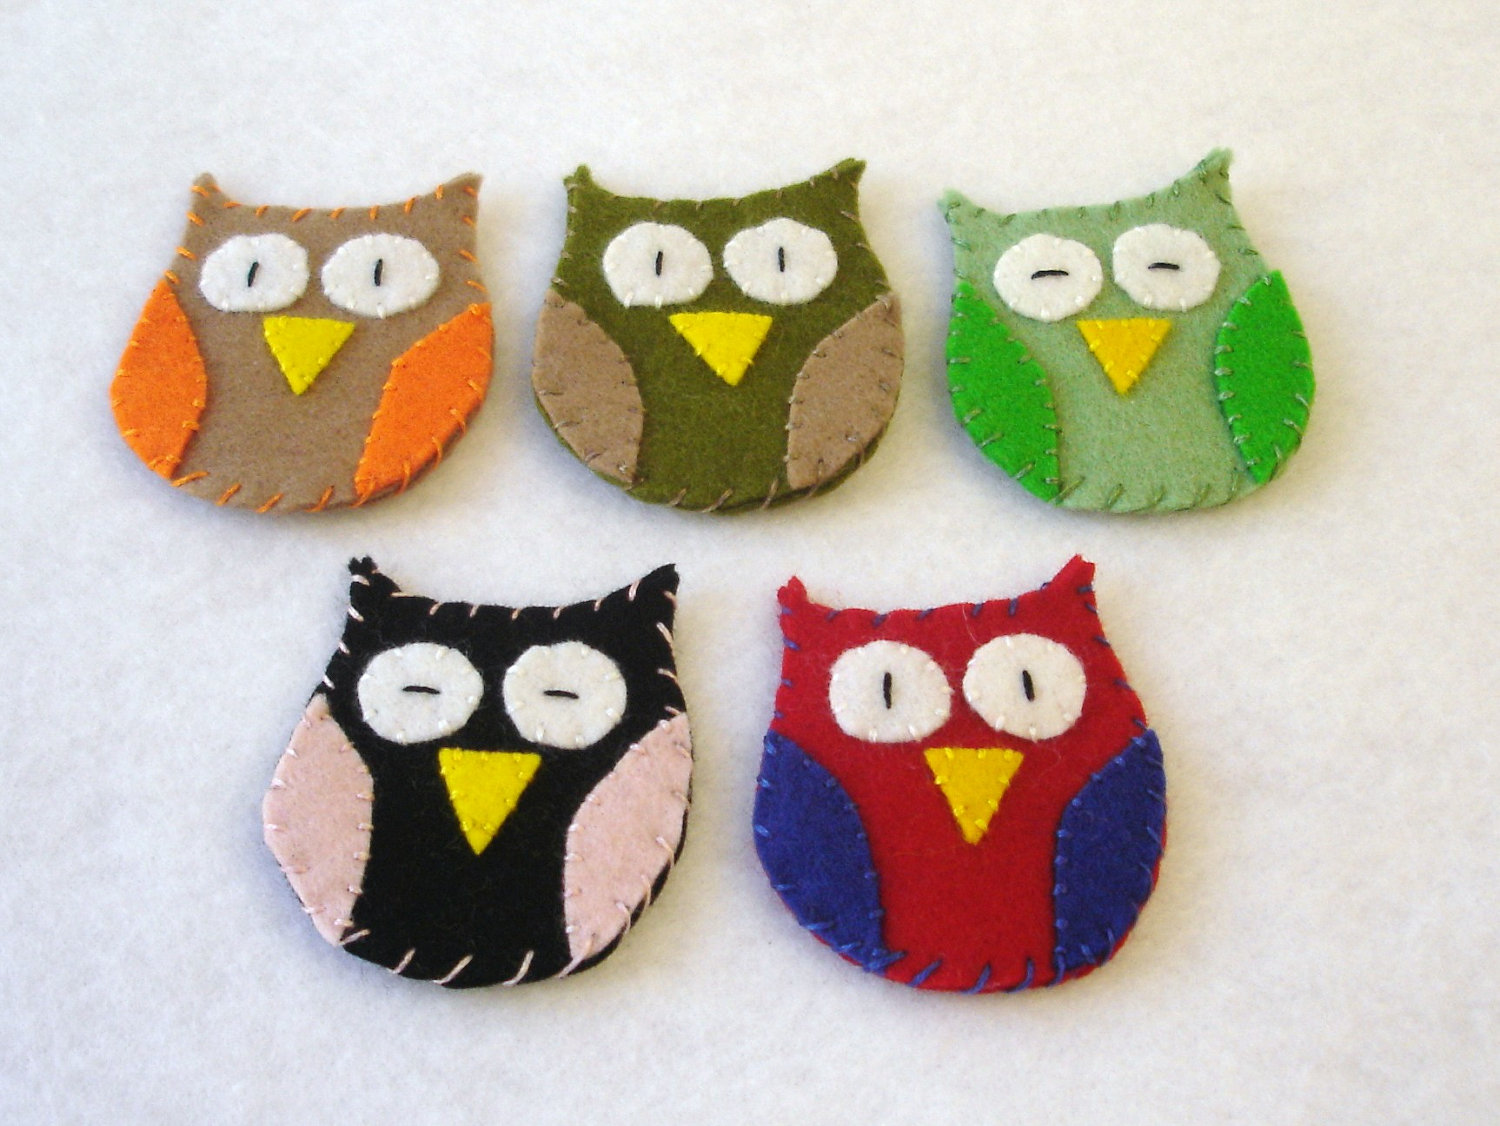 Owl Math Clipart Of 5 Counting Owls   Math